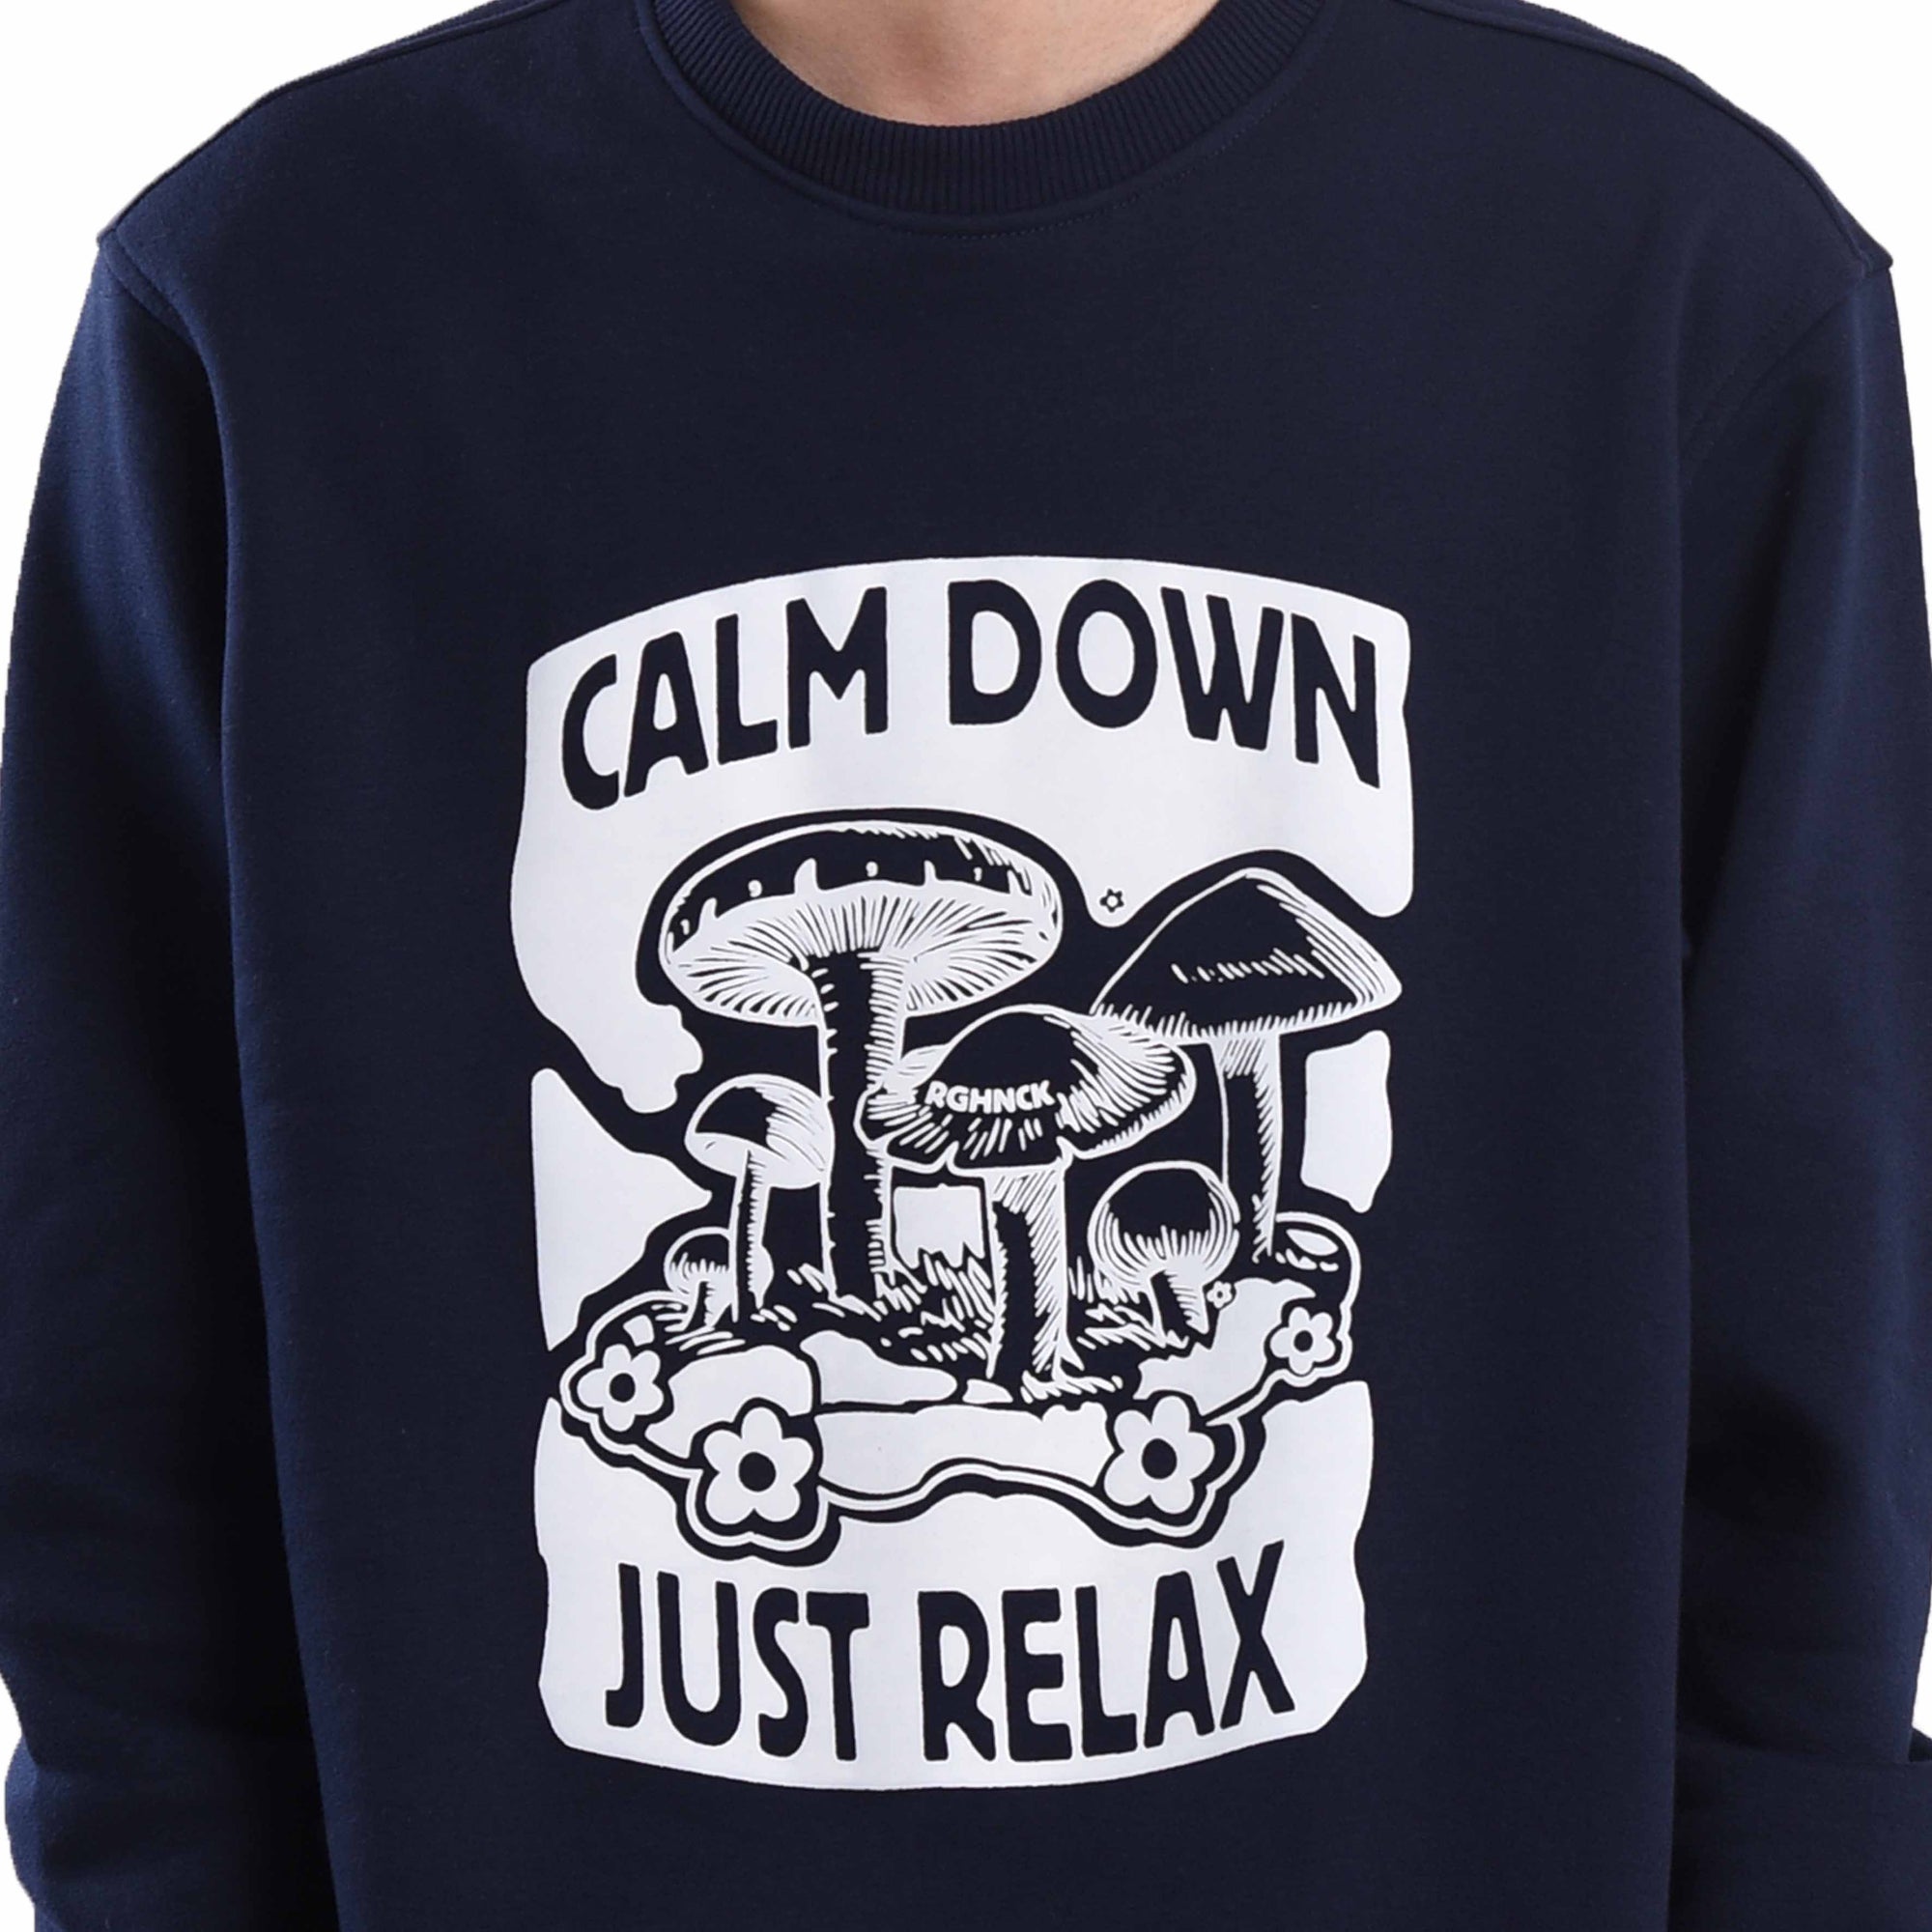 SS349 Calm Down Just Relax Navy Crewneck